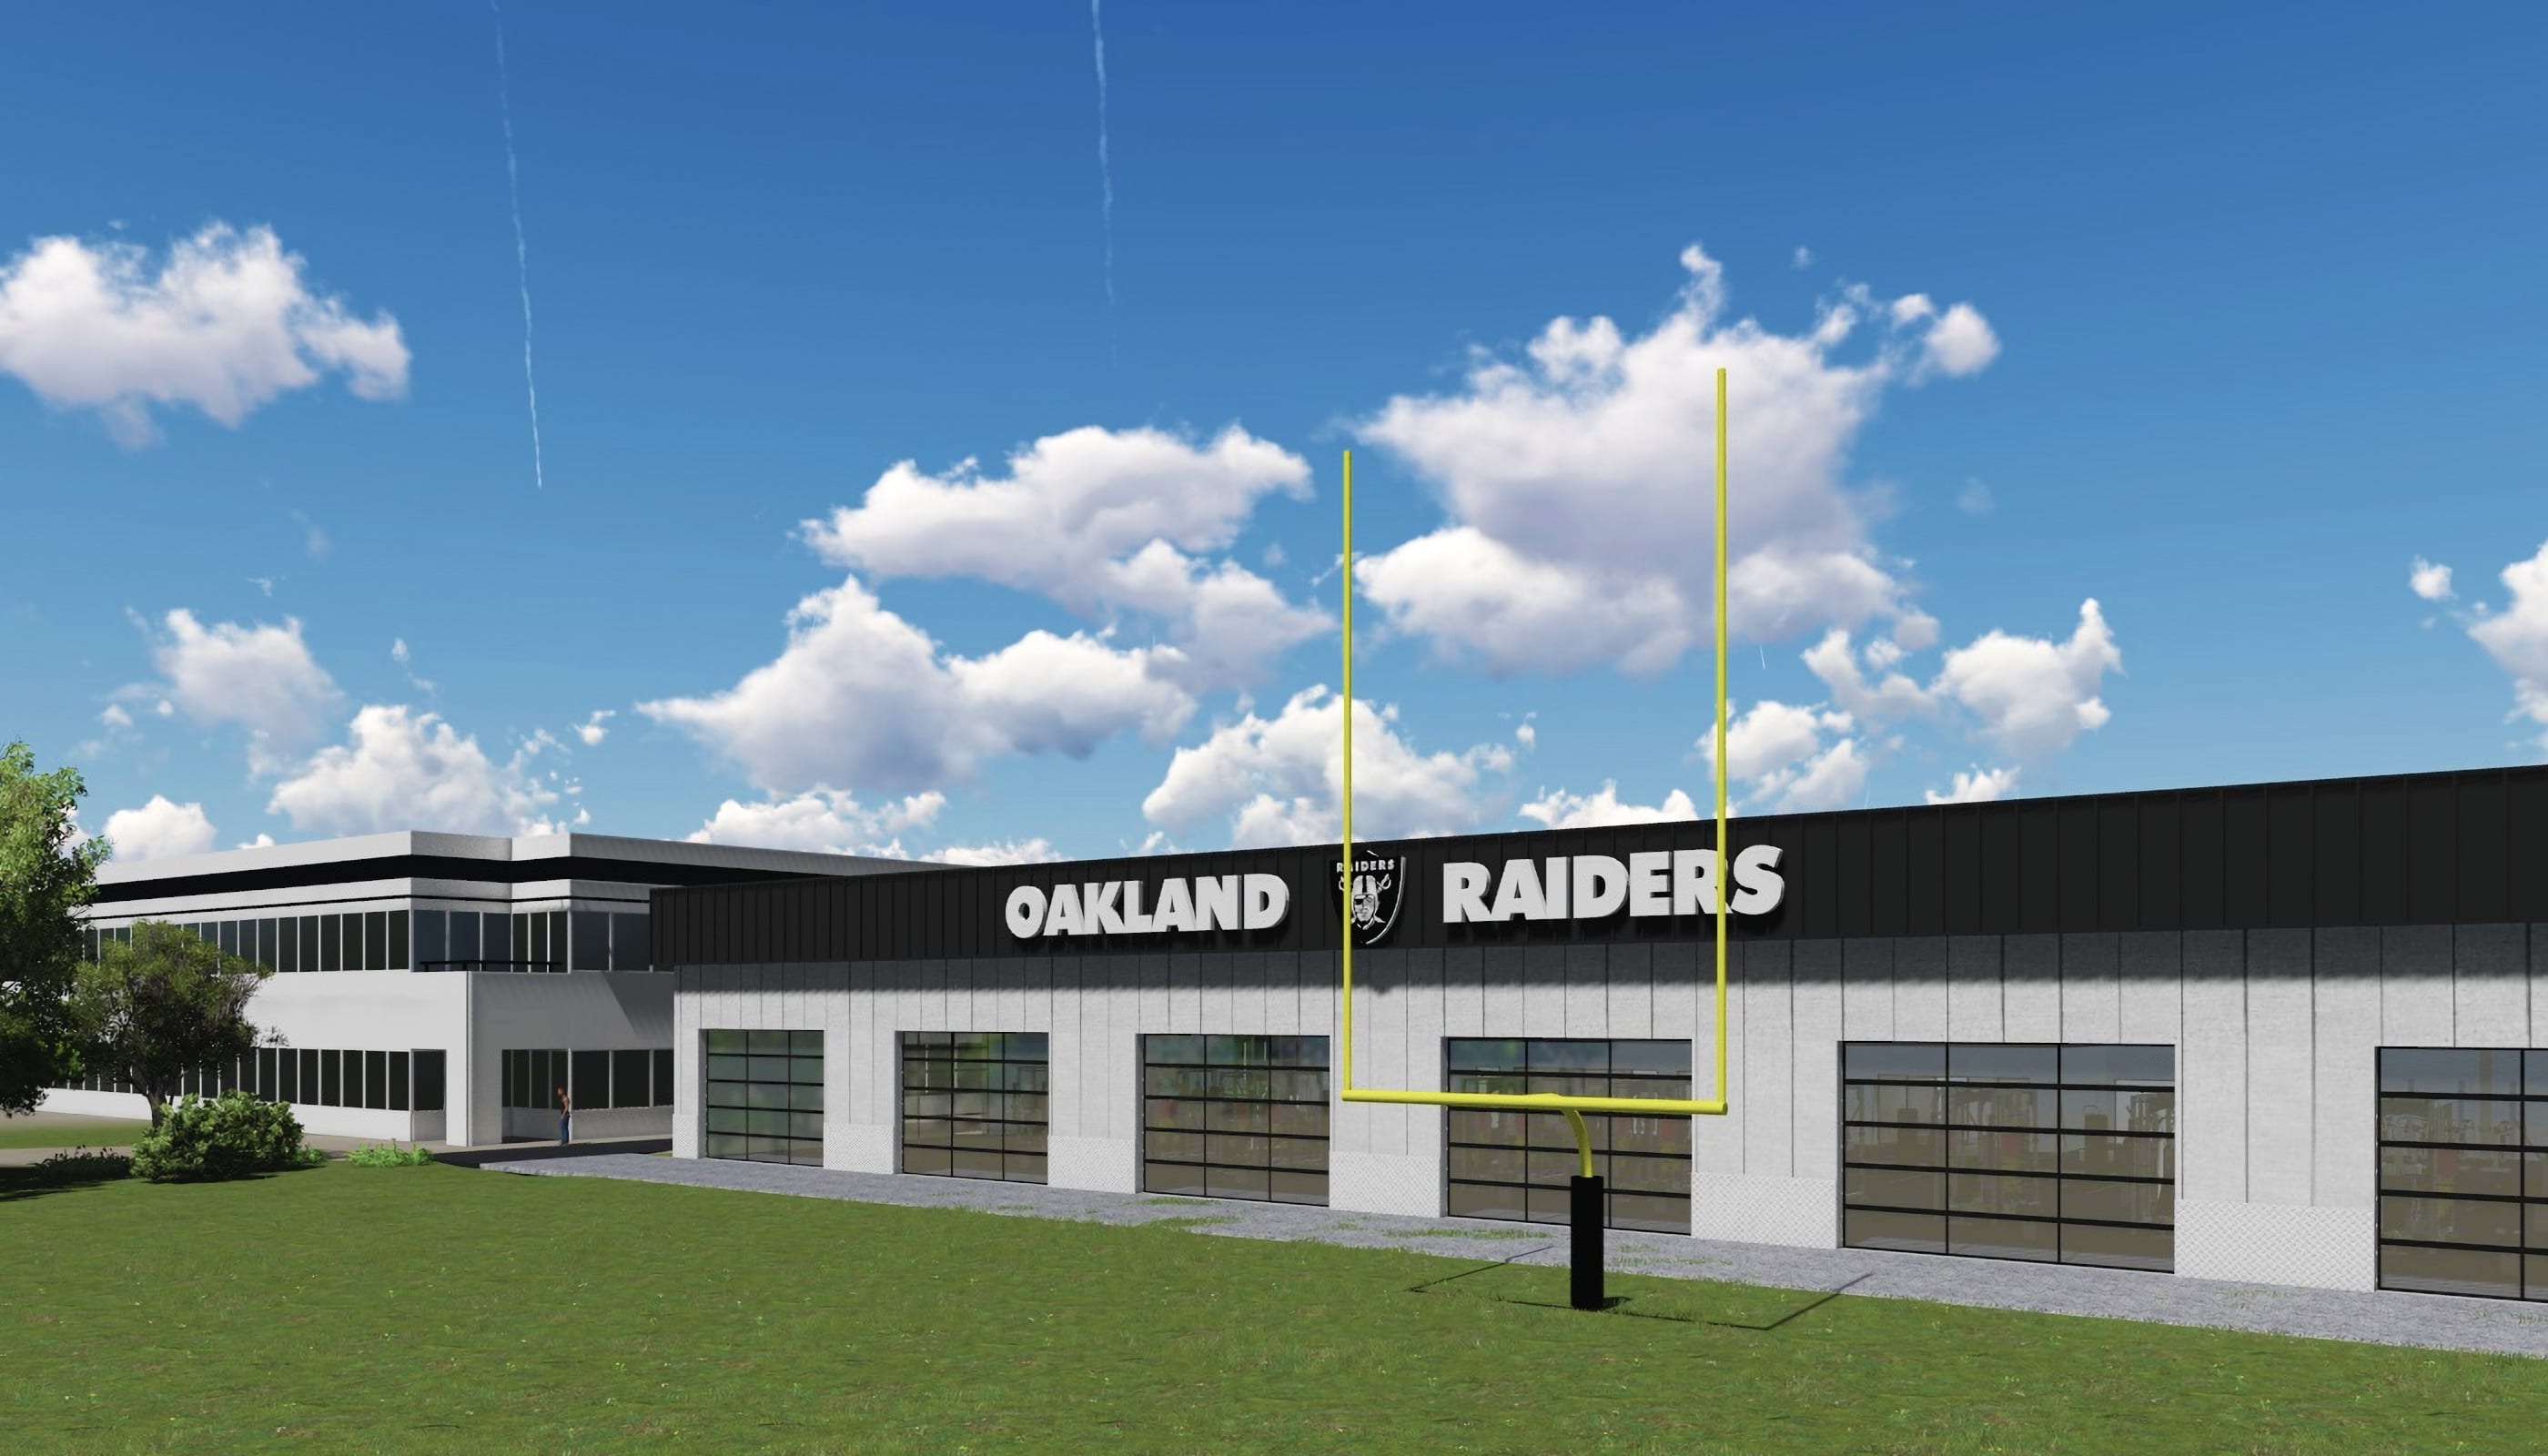 Oakland Raiders Training Facility-HERO - Commercial Architecture